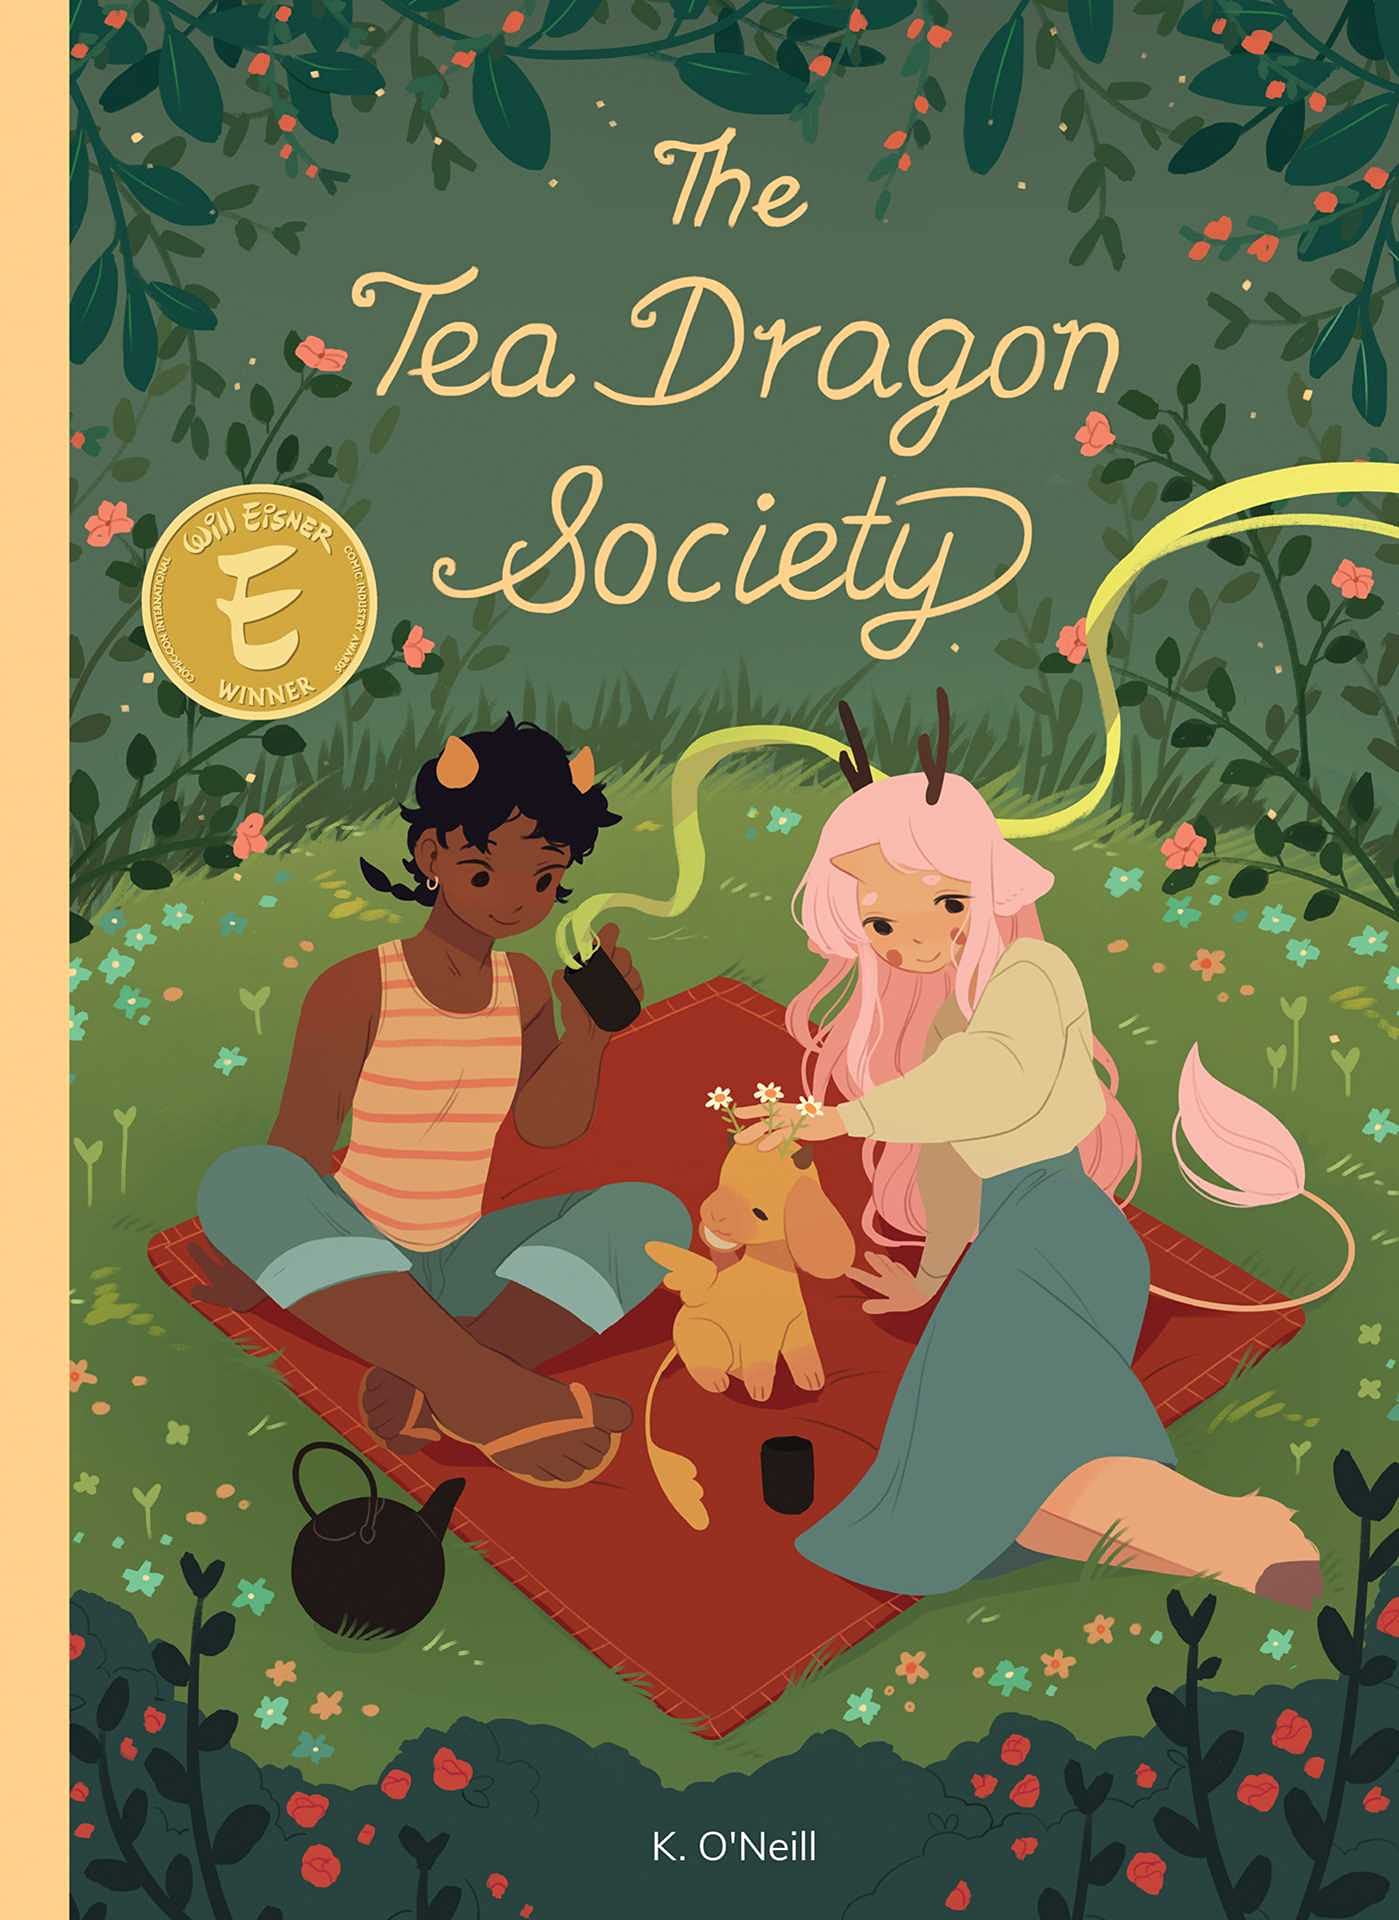 An illustration shows a green park with two friends enjoying tea on a blanket, pettting a small tea dragon. The friends are fantasy creatures with horns, dressed in modern casual clothes like flip flops.